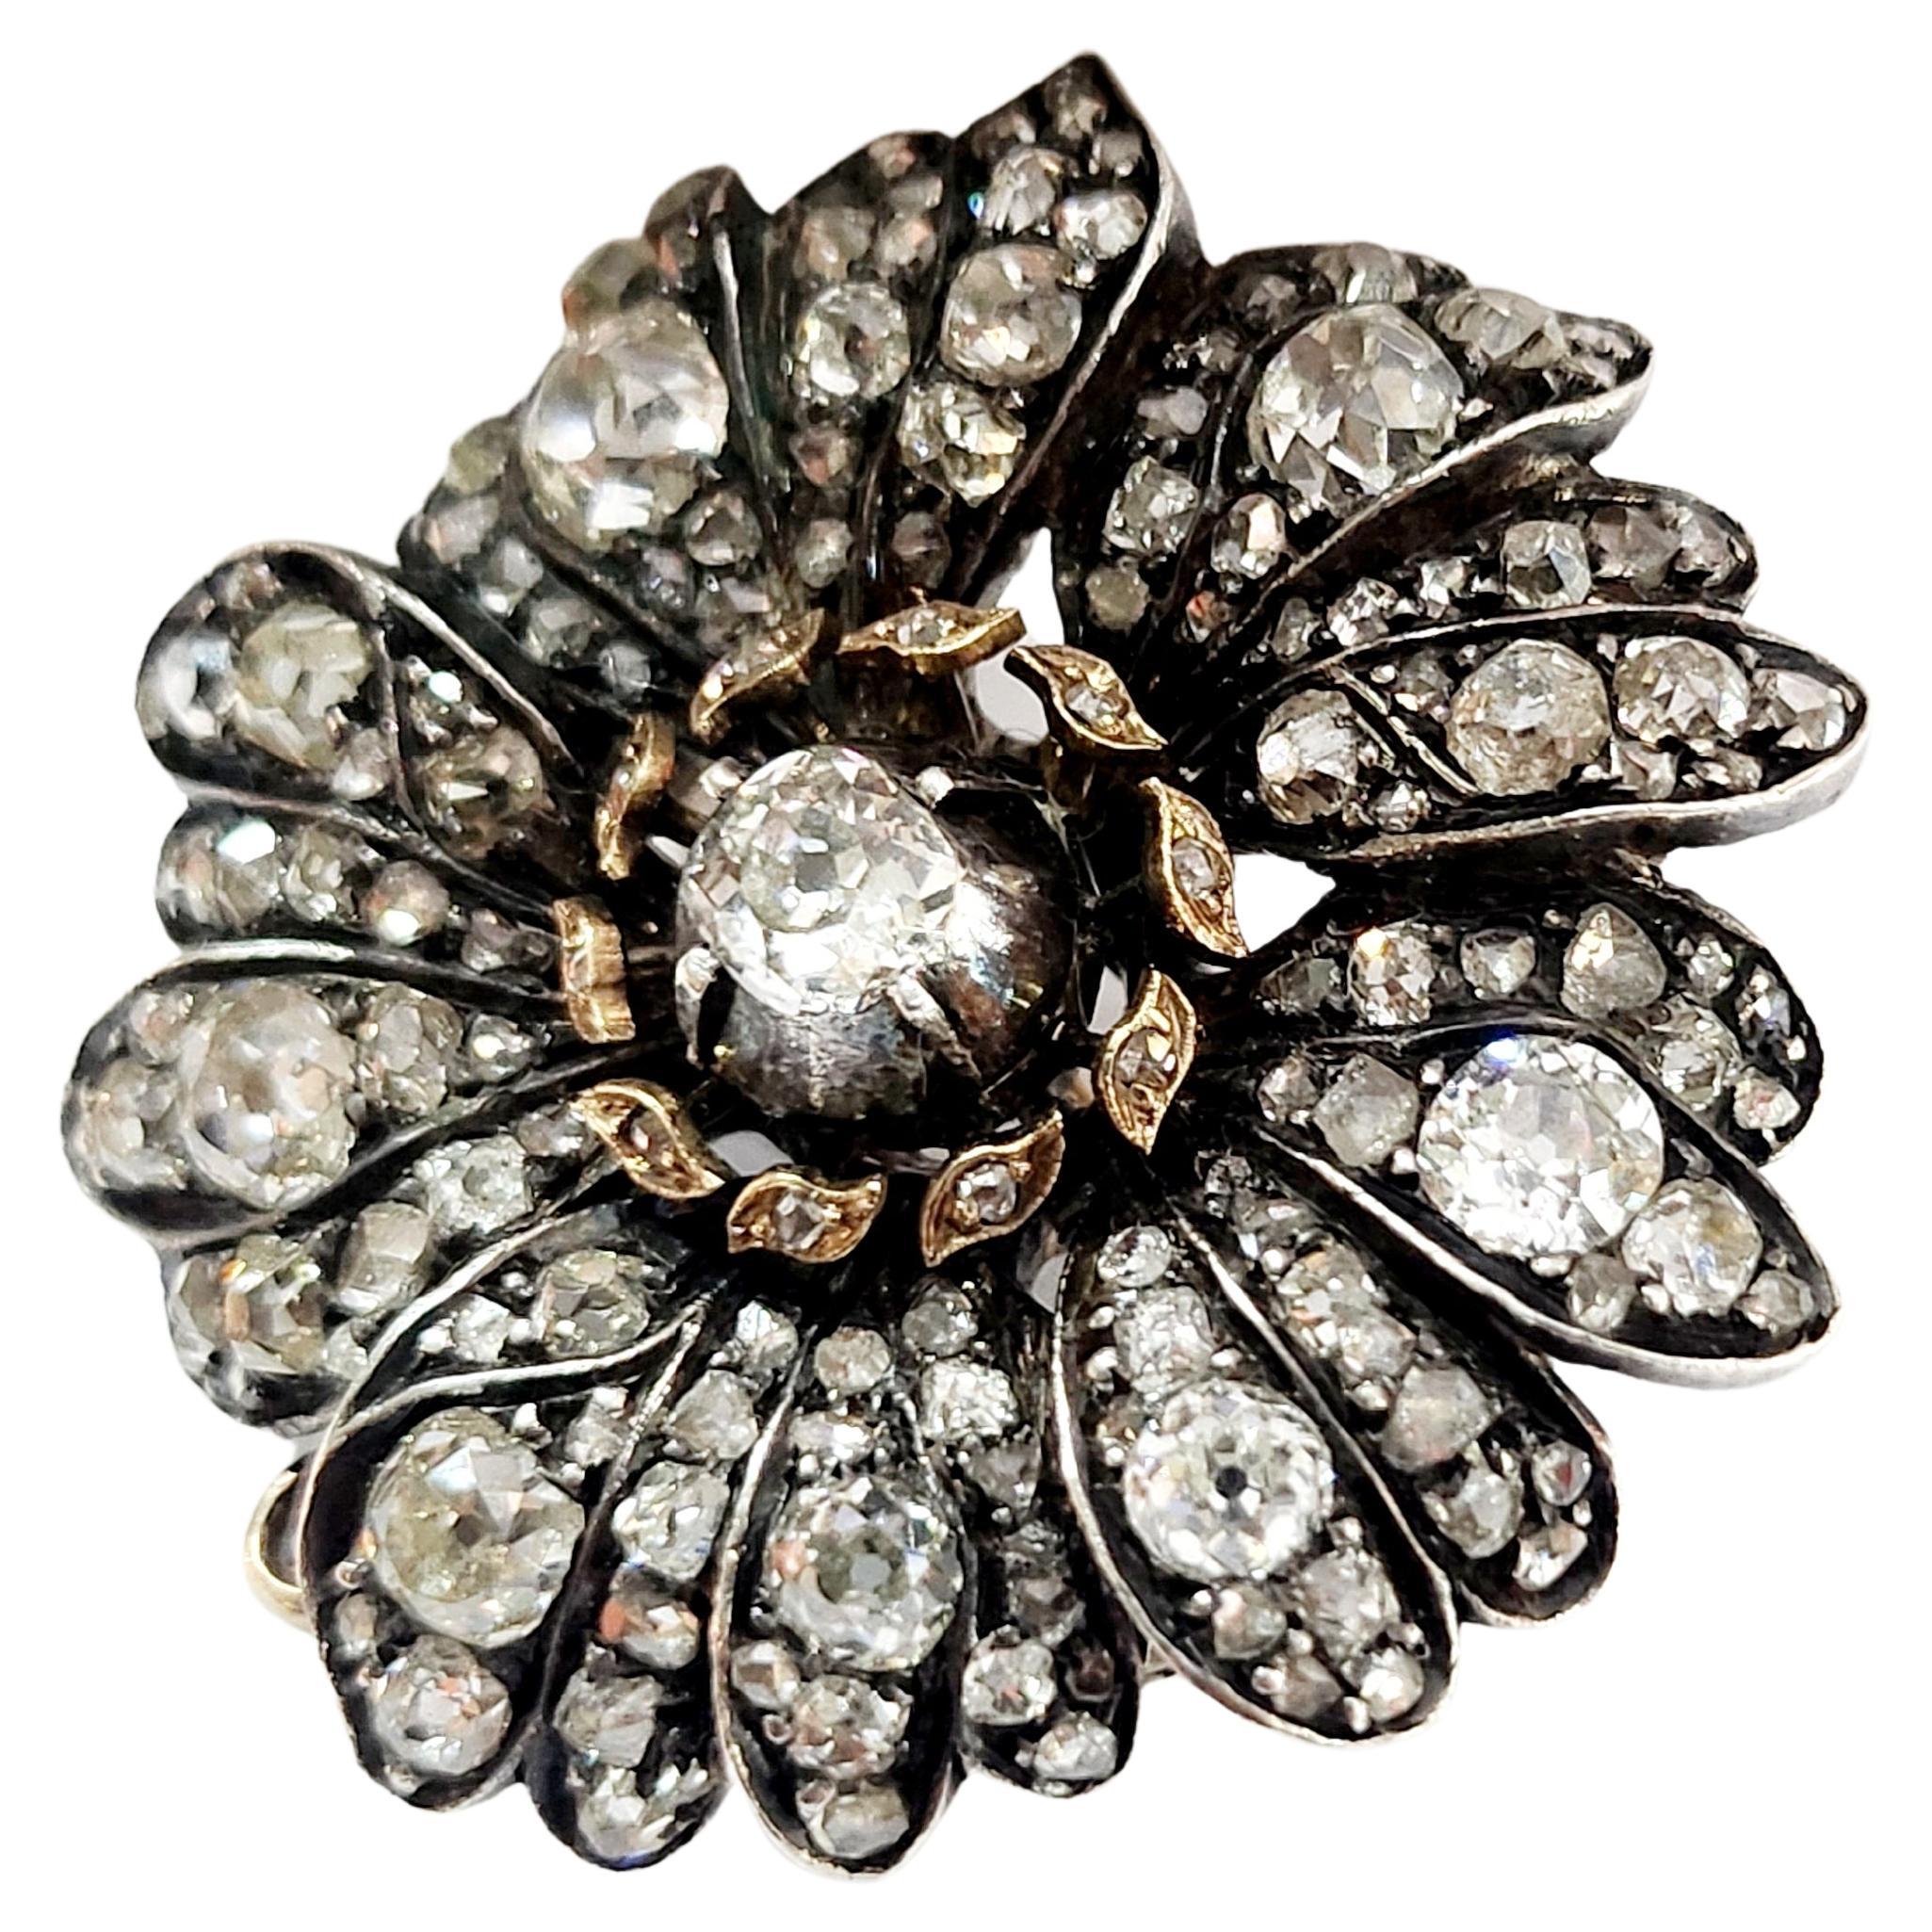 Antique victorian old mine cut diamond large flower head brooch and pendant with estimate diamond weight of 4.5 carats centered with a large old cut diamond flanked with smaller diamonds in a floral designe 14k gold topped with silver dates back to